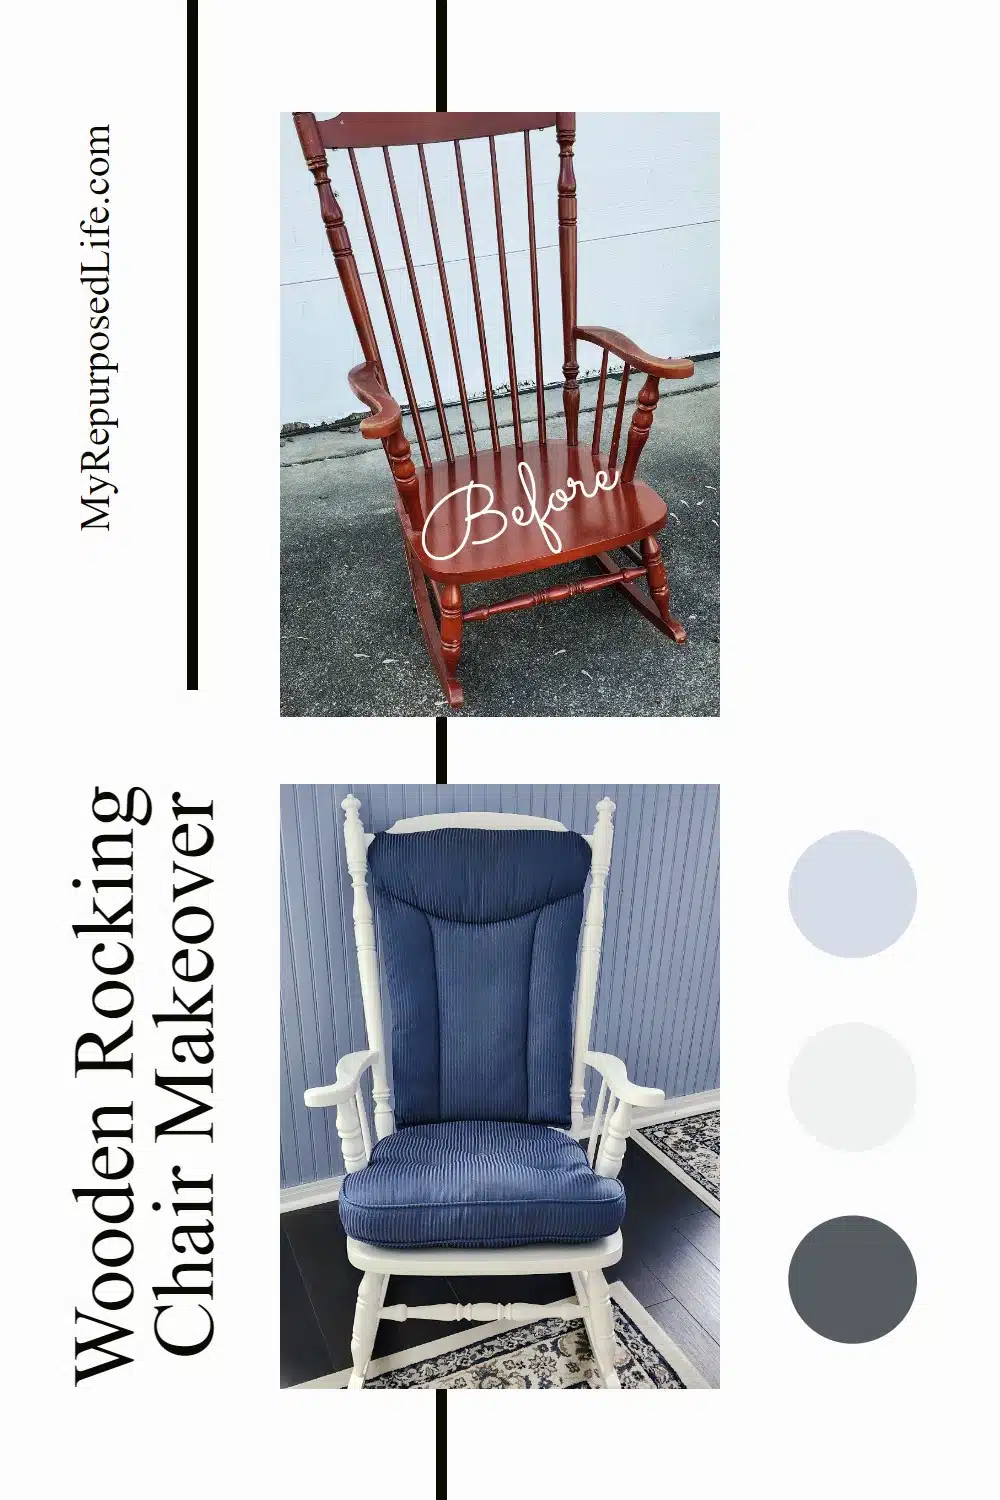 An outdated wooden rocking chair gets a fresh new look with white paint. Bonus projects from the Furniture Fixer Upper Team. via @repurposedlife